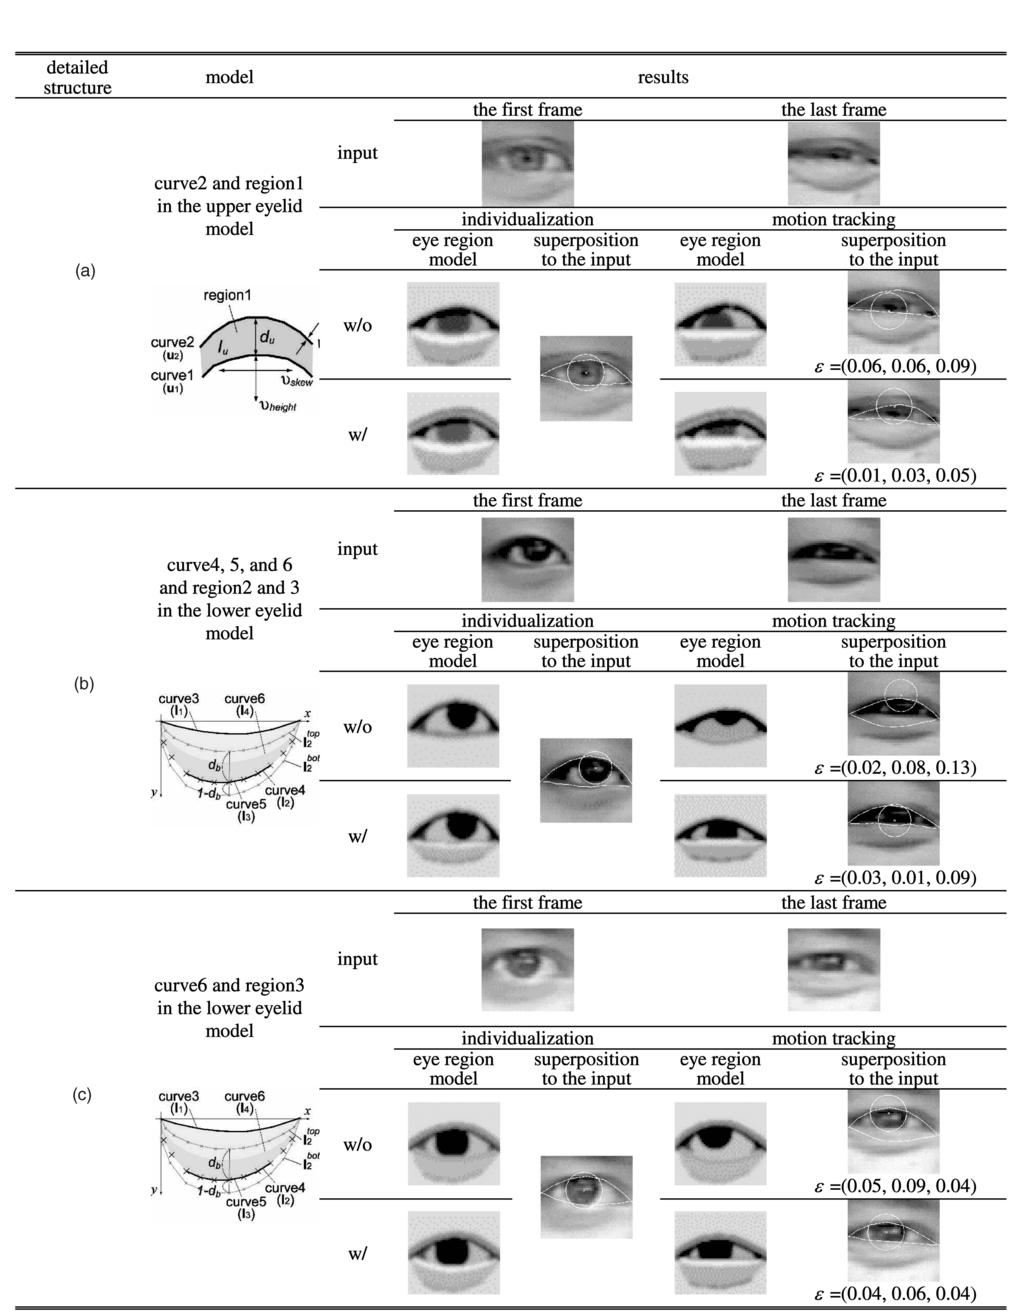 MORIYAMA ET AL.: METICULOUSLY DETAILED EYE REGION MODEL AND ITS APPLICATION TO ANALYSIS OF FACIAL IMAGES 749 TABLE 10 Different Levels of Detail of the Model and Their Effects (a) Double eyelid folds.